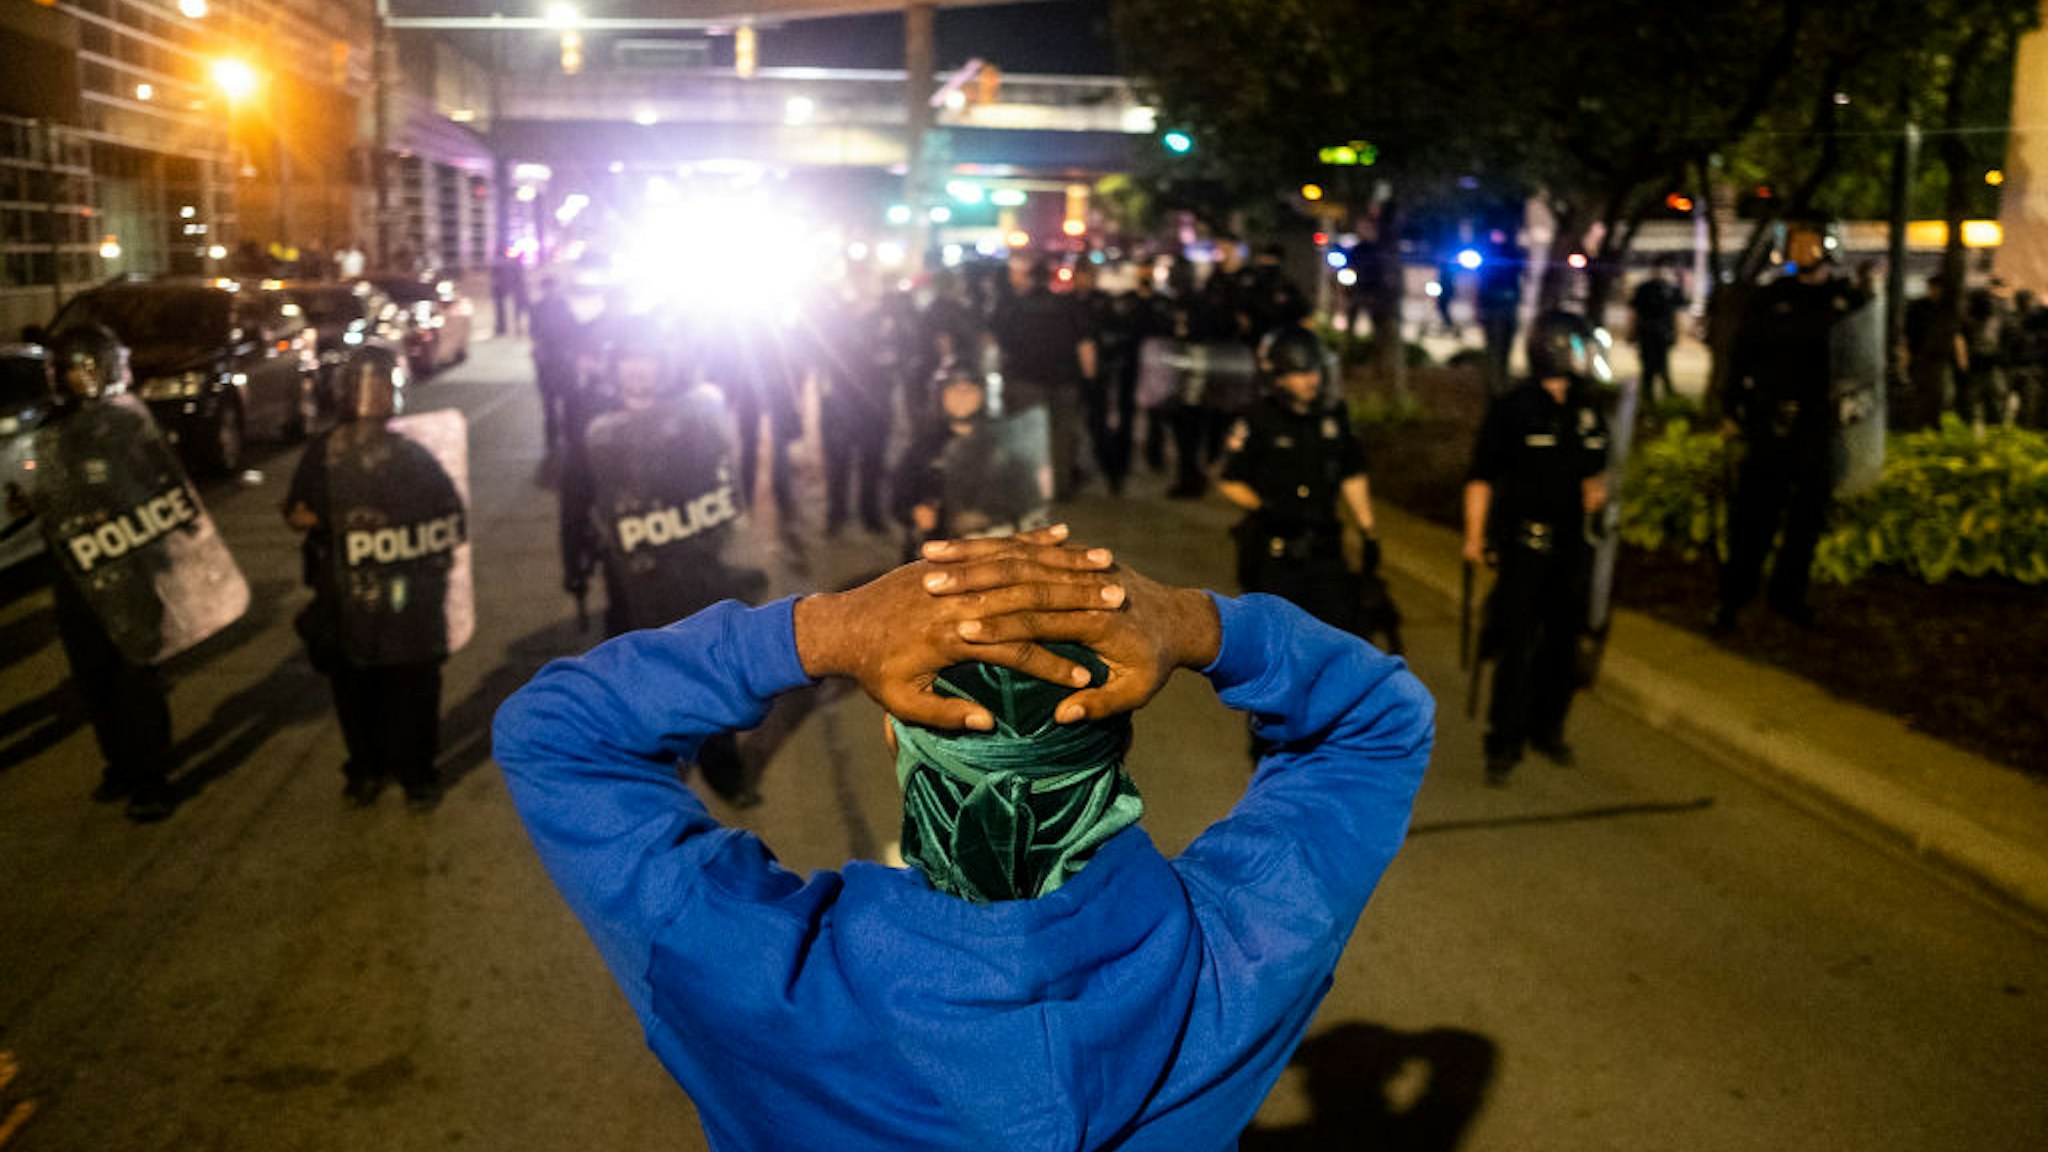 DETROIT, MI - MAY 29: Protester faces a line of police as over 1000 protesters gathered on May 29, 2020 in Detroit, Michigan. A solidarity rally was held with other nationwide protests against the death of Minneapolis, Minnesota resident, George Floyd. Protests continued later into the night police and protesters clashed in a series of violent confrontations where police arrested dozens and used tear gas and pepper spray. (Photo by Matthew Hatcher/Getty Images)